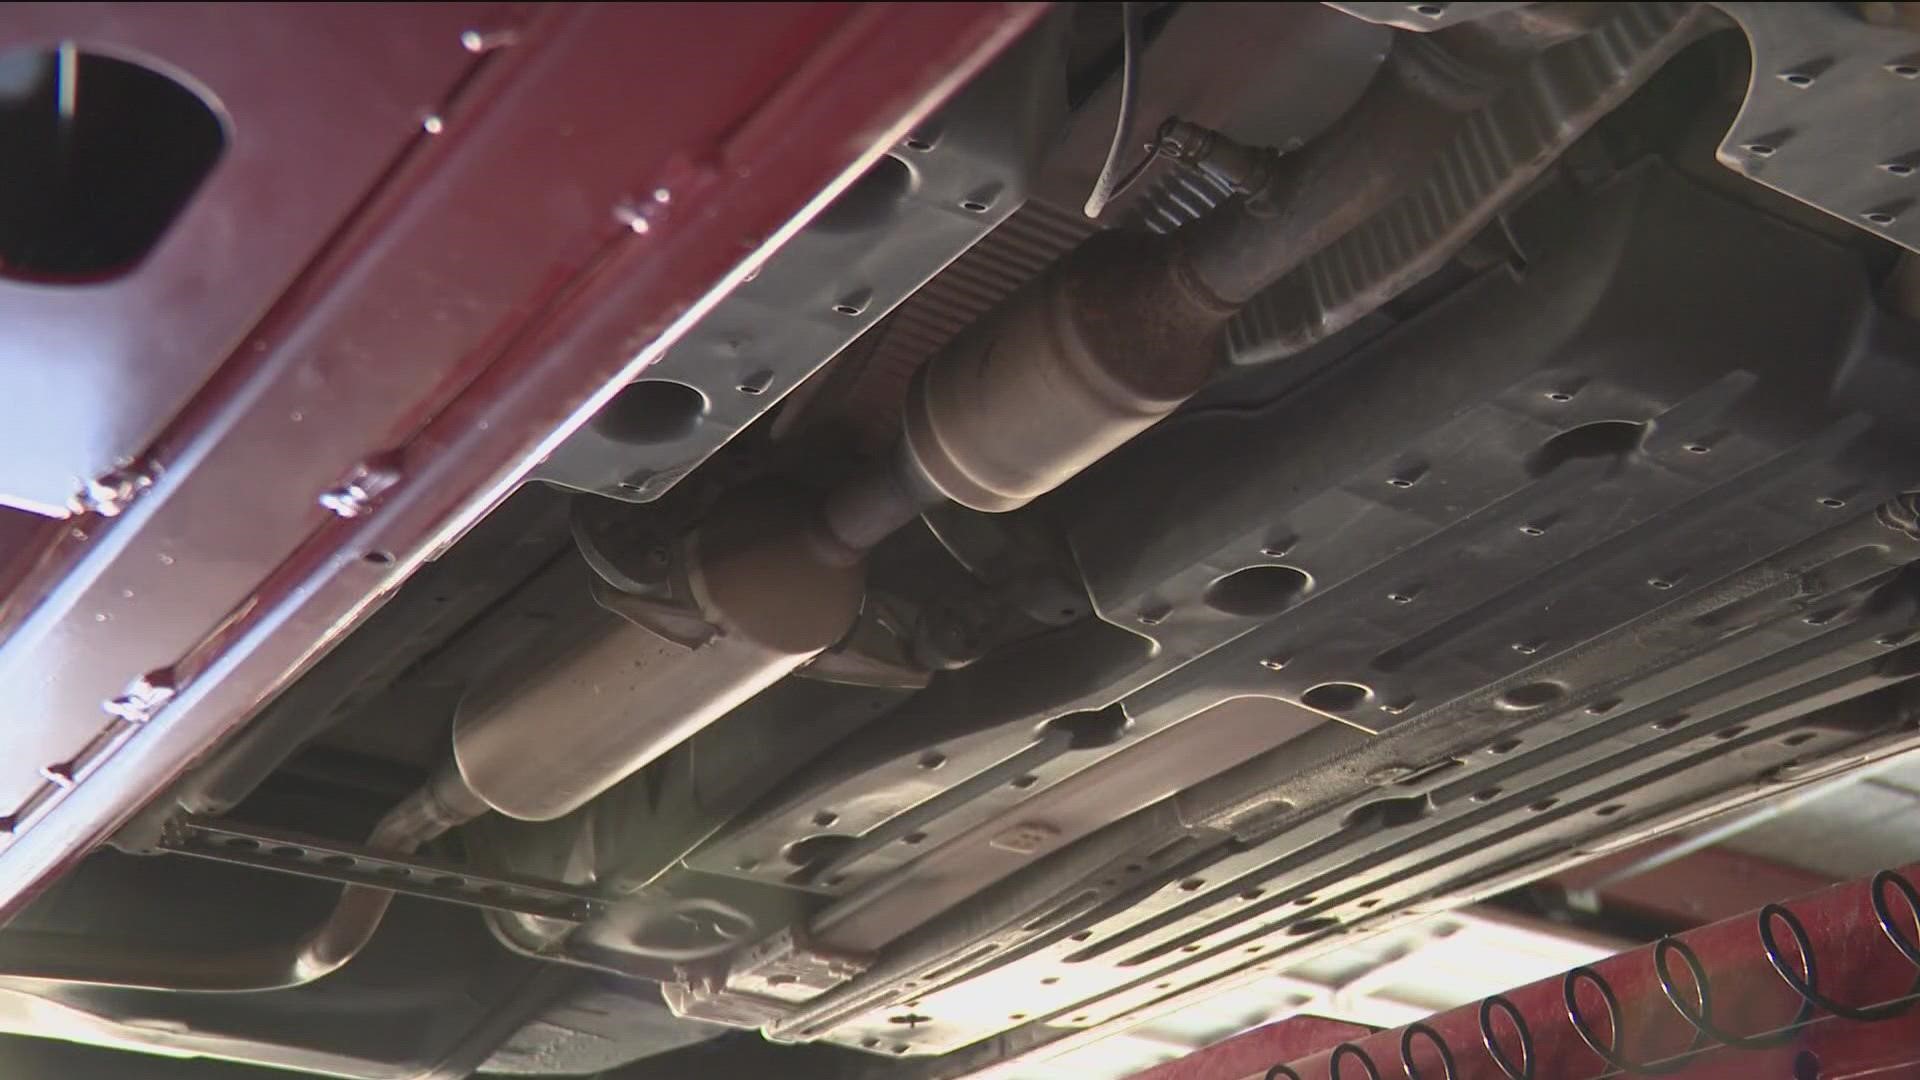 Thieves who steal the car part are looking for the precious metals inside of it that can be sold for a lot of money.